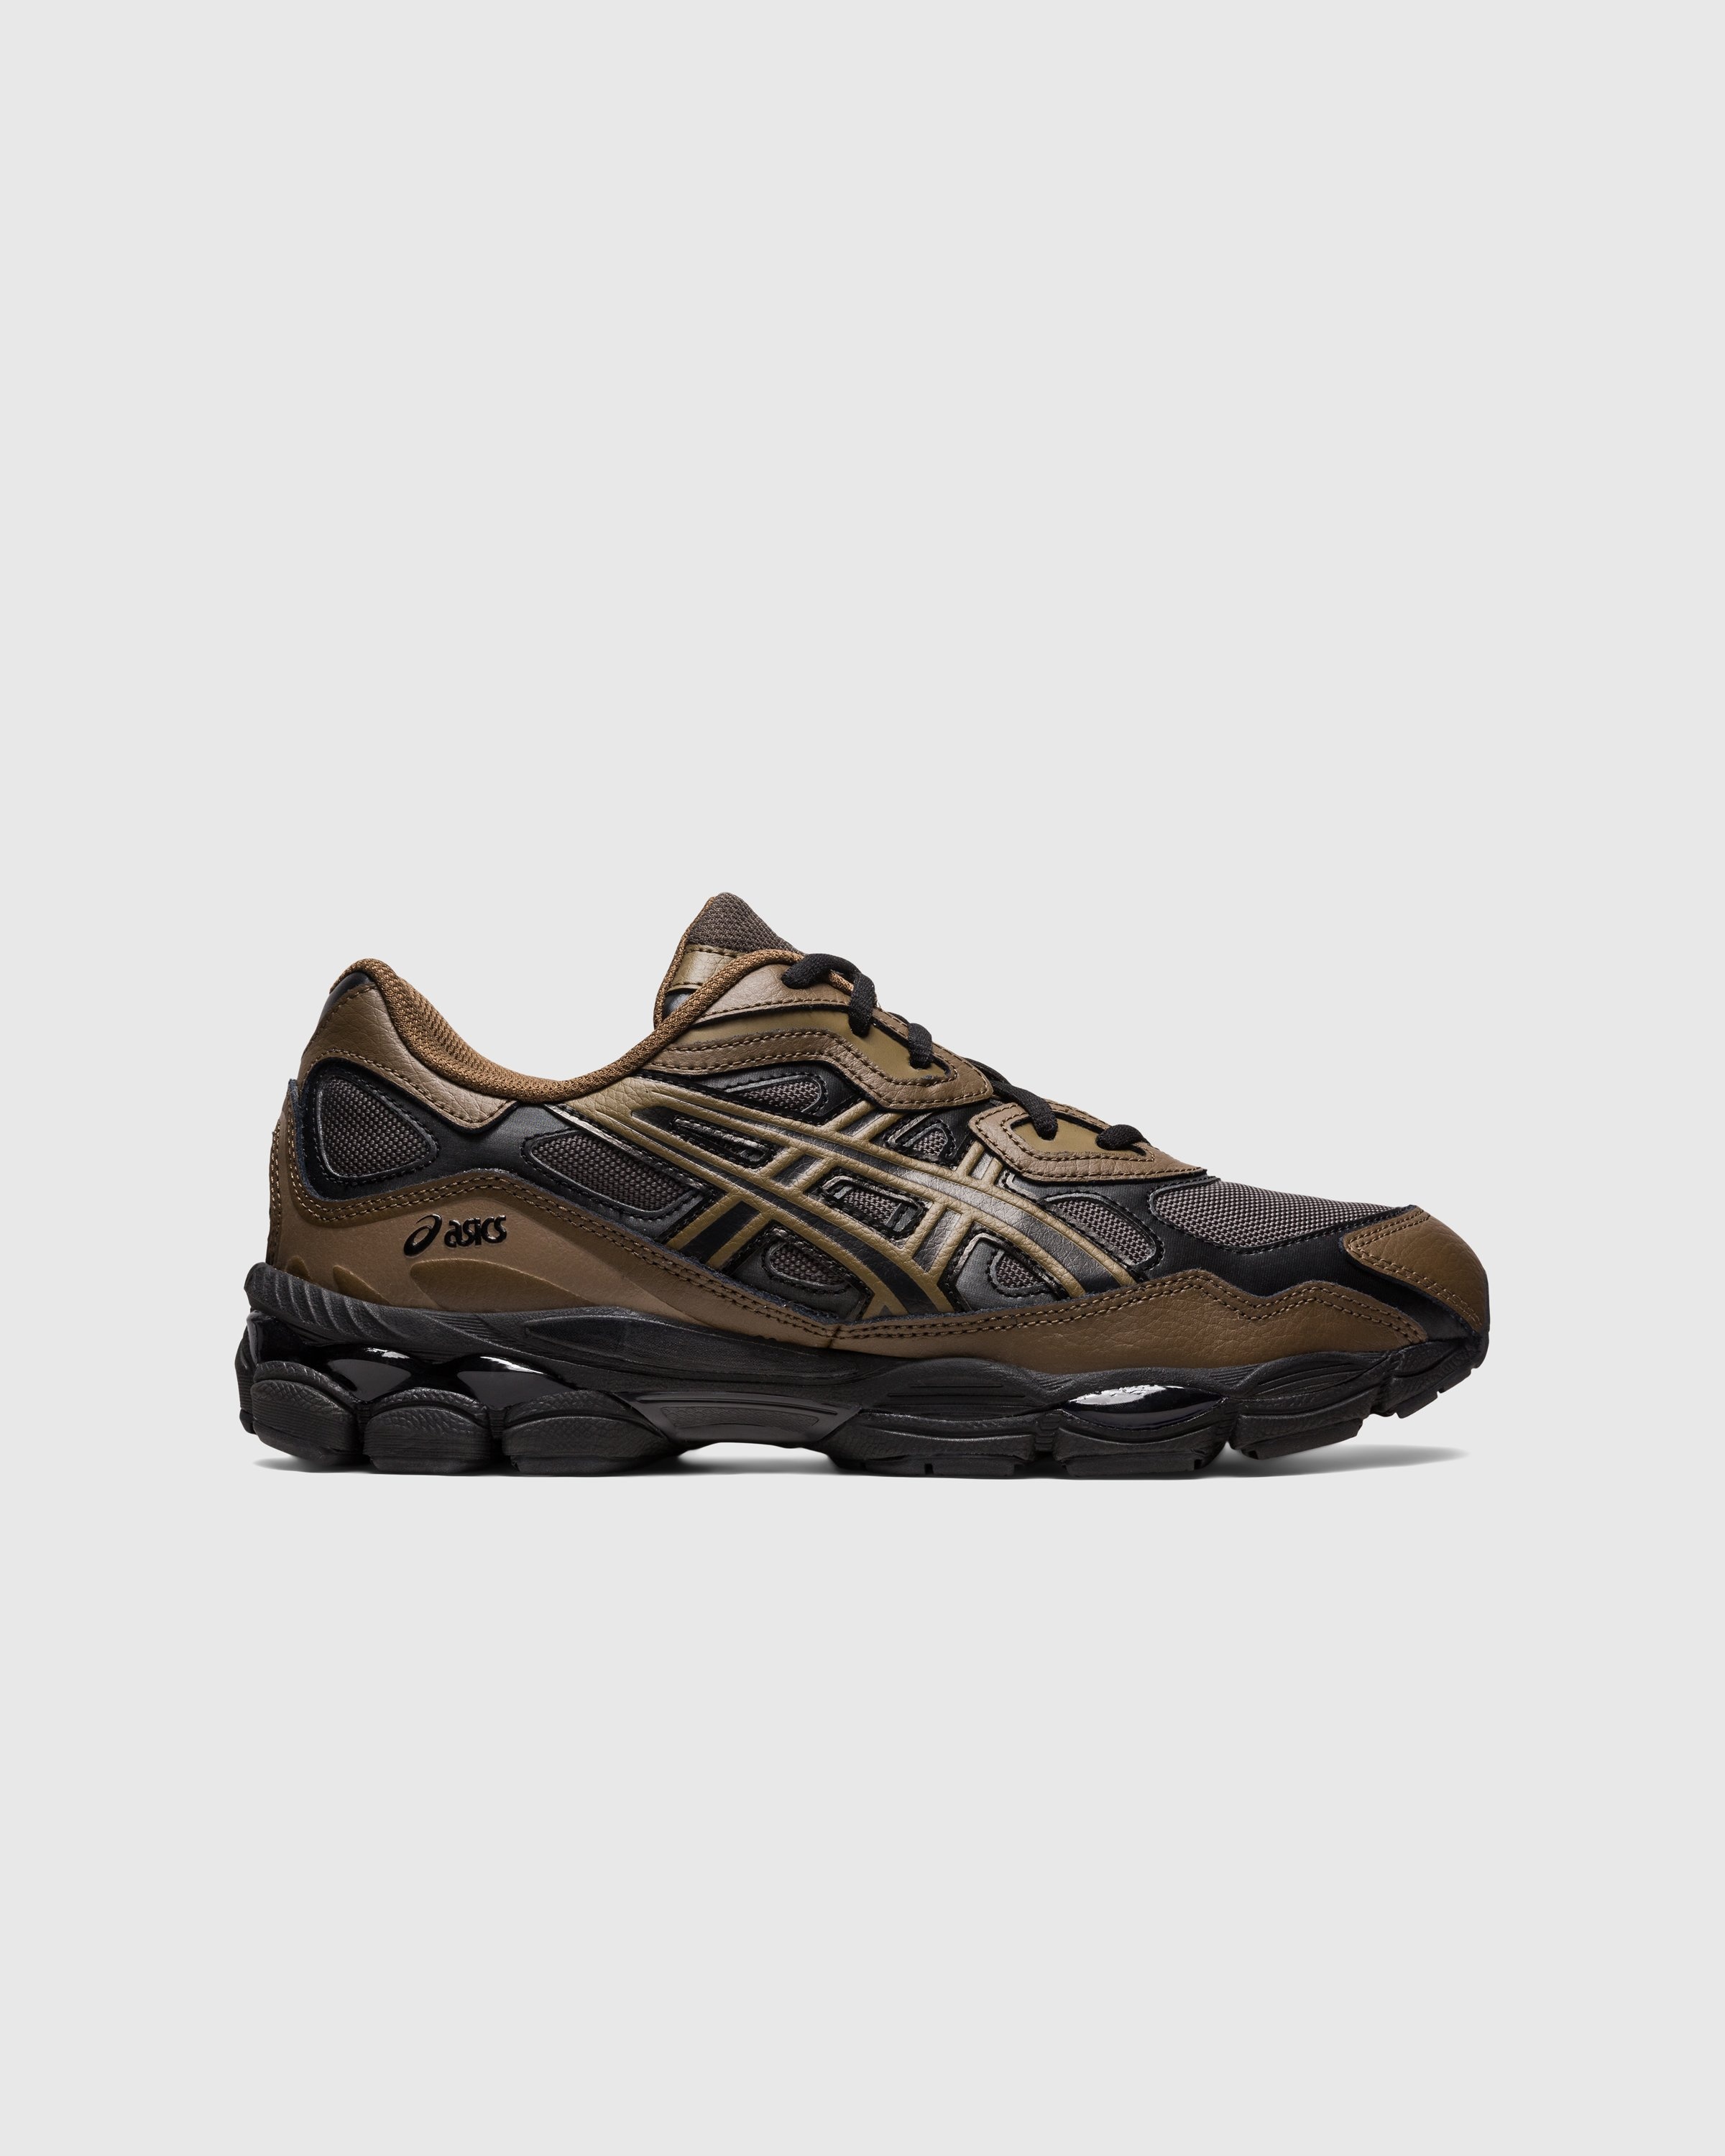 asics – GEL-NYC Dark Sepia/Clay Canyon - Sneakers - Multi - Image 1